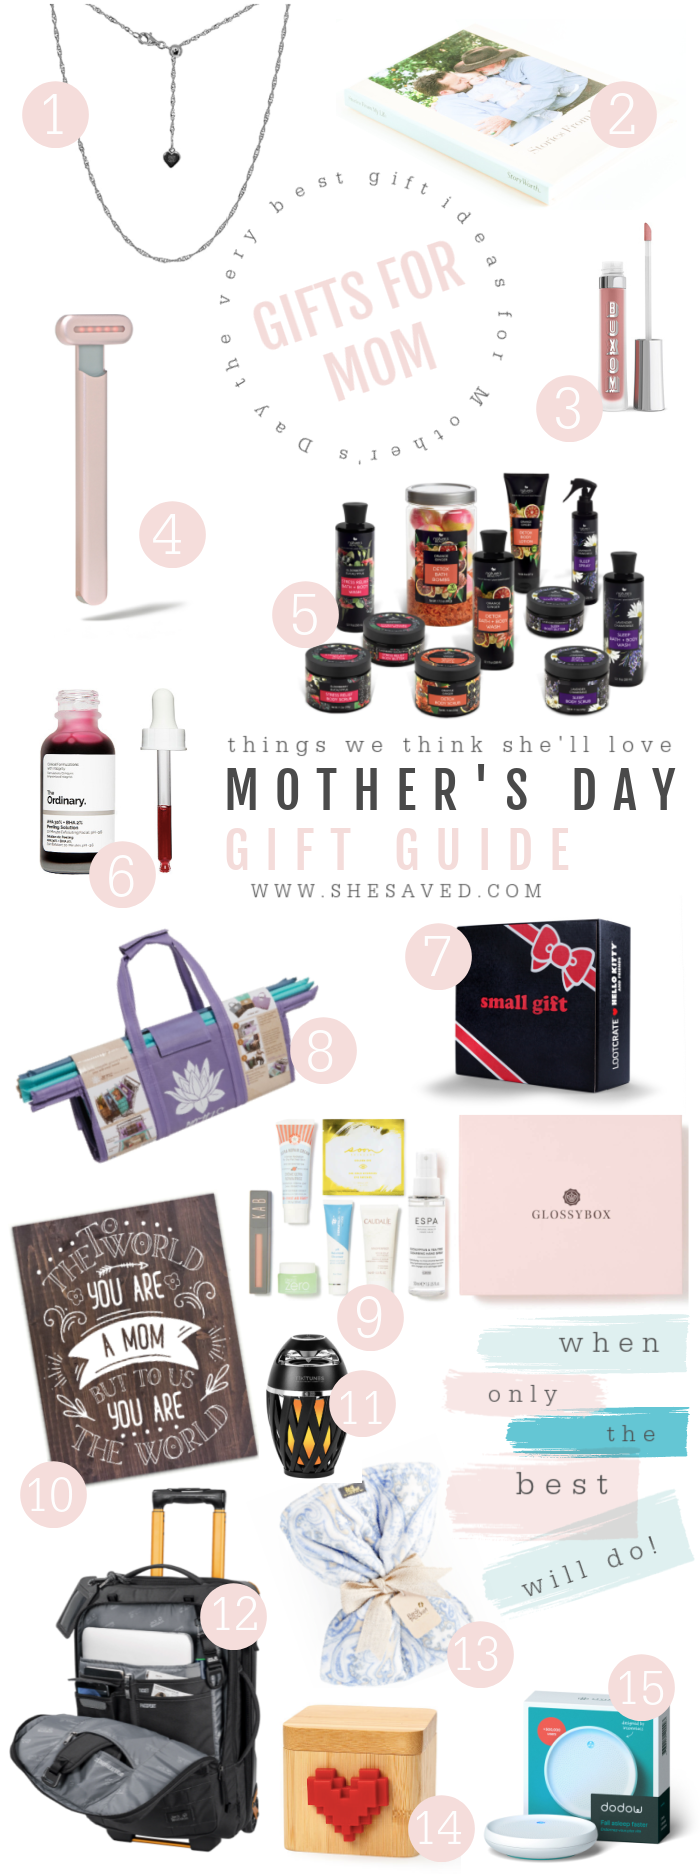 https://www.shesaved.com/wp-content/uploads/2021/04/Mothers-Day-Gift-Ideas-Guide-Items-2021.png